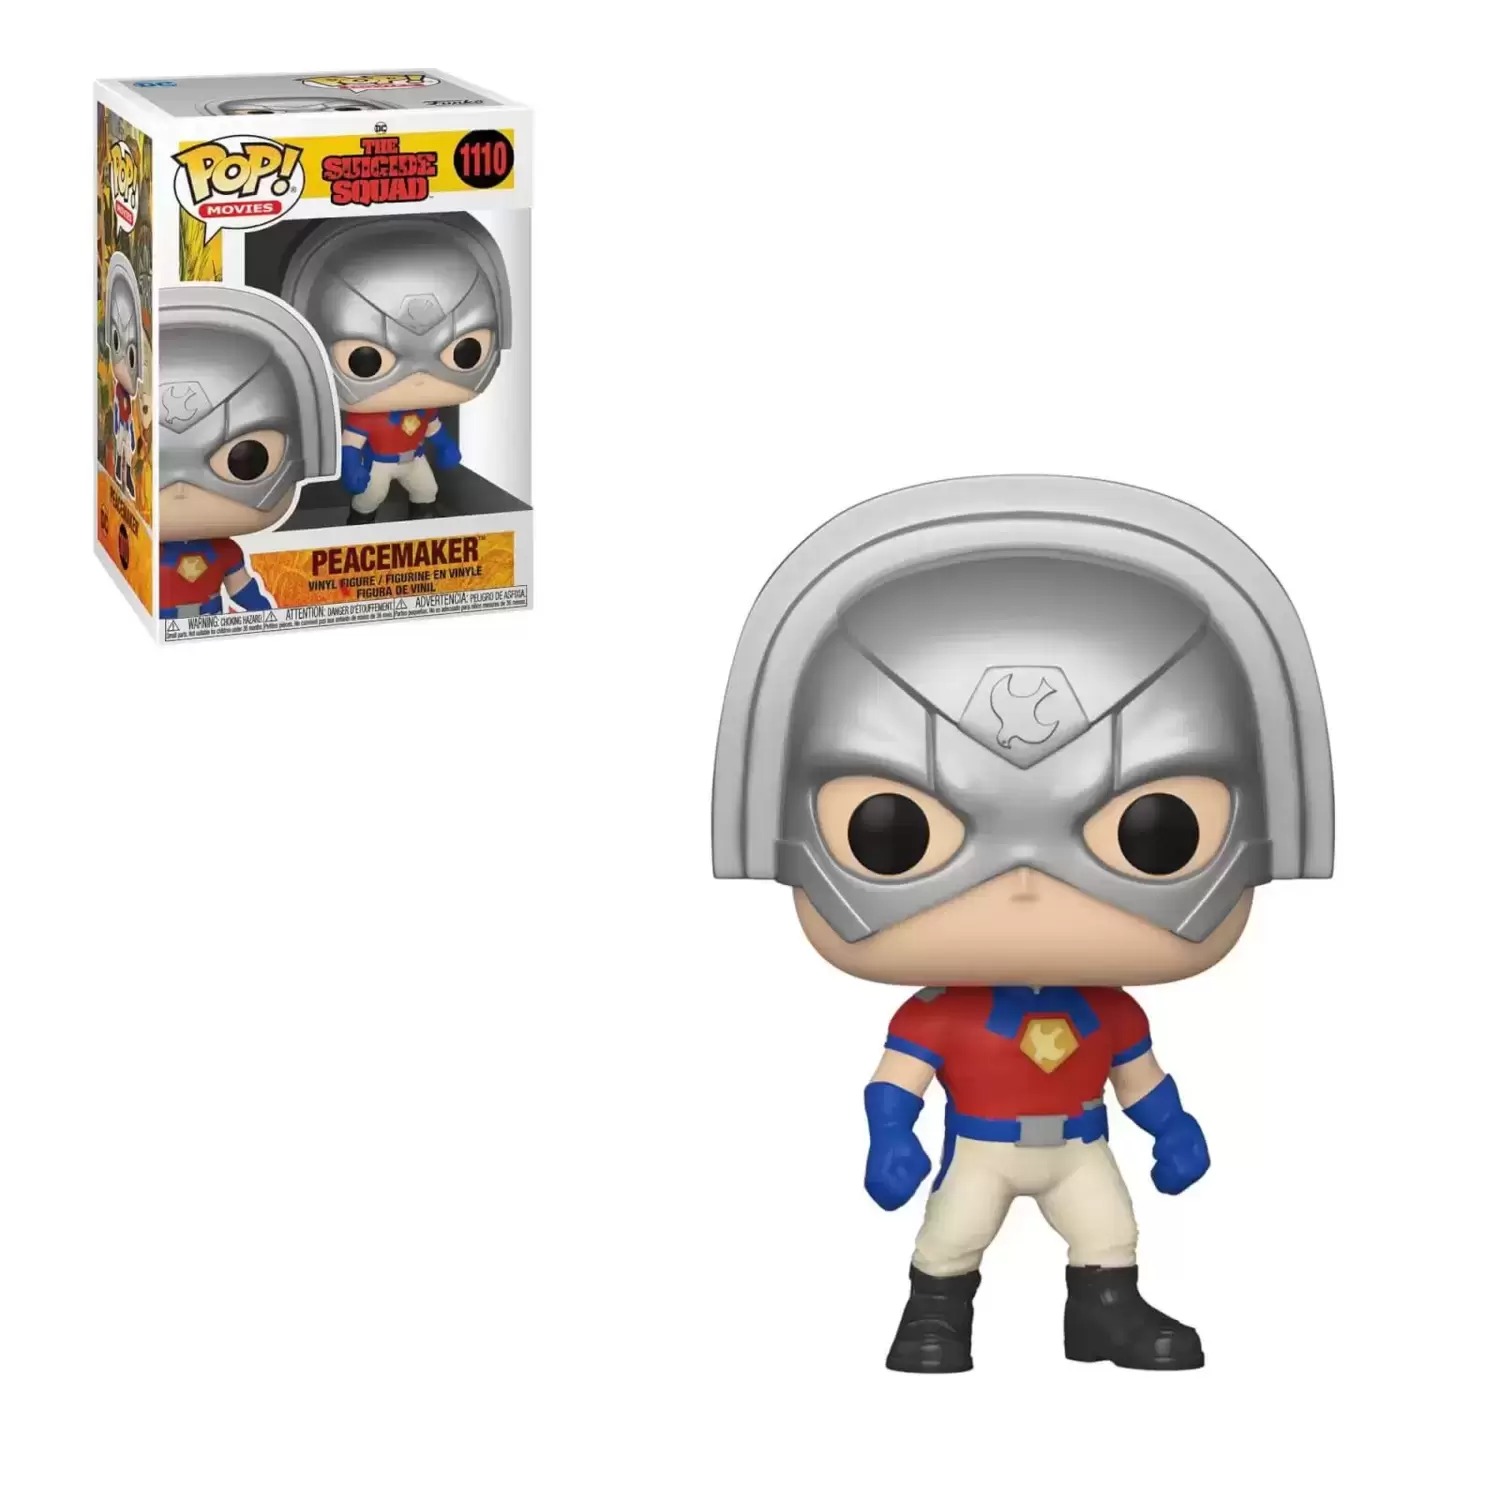 POP! Movies - The Suicide Squad - Peacemaker